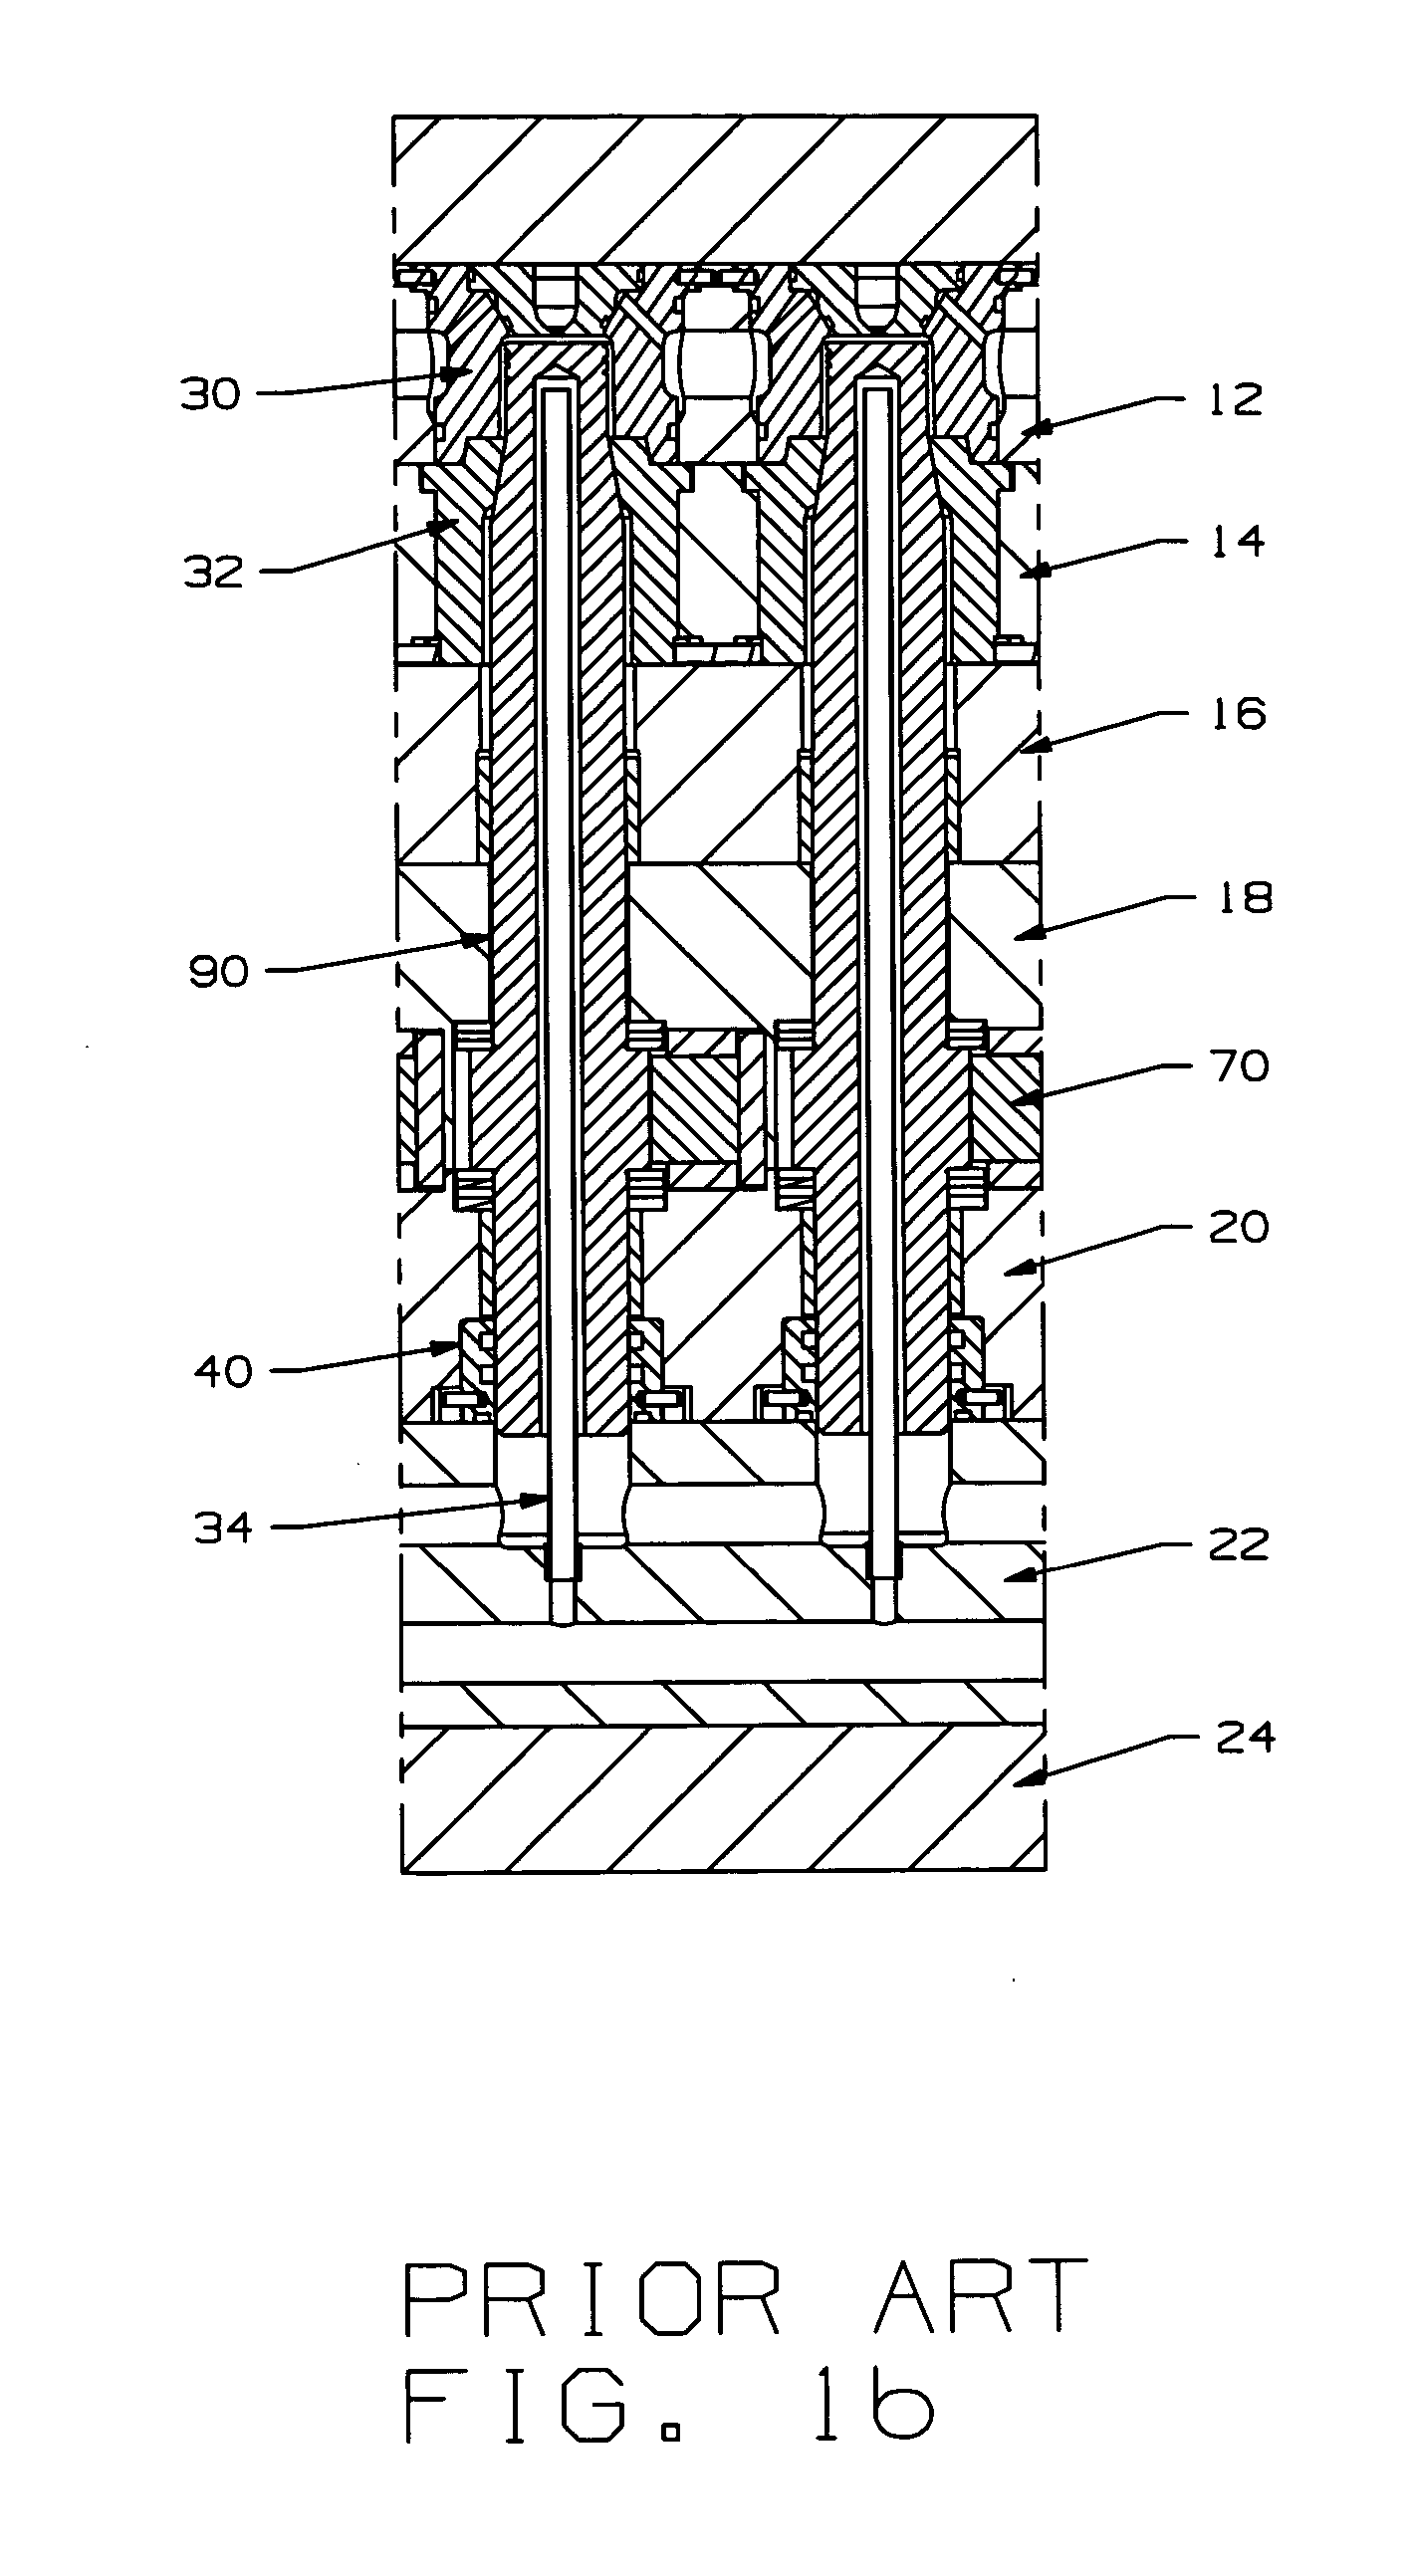 Apparatus for making threaded articles in a plastic injection molding process